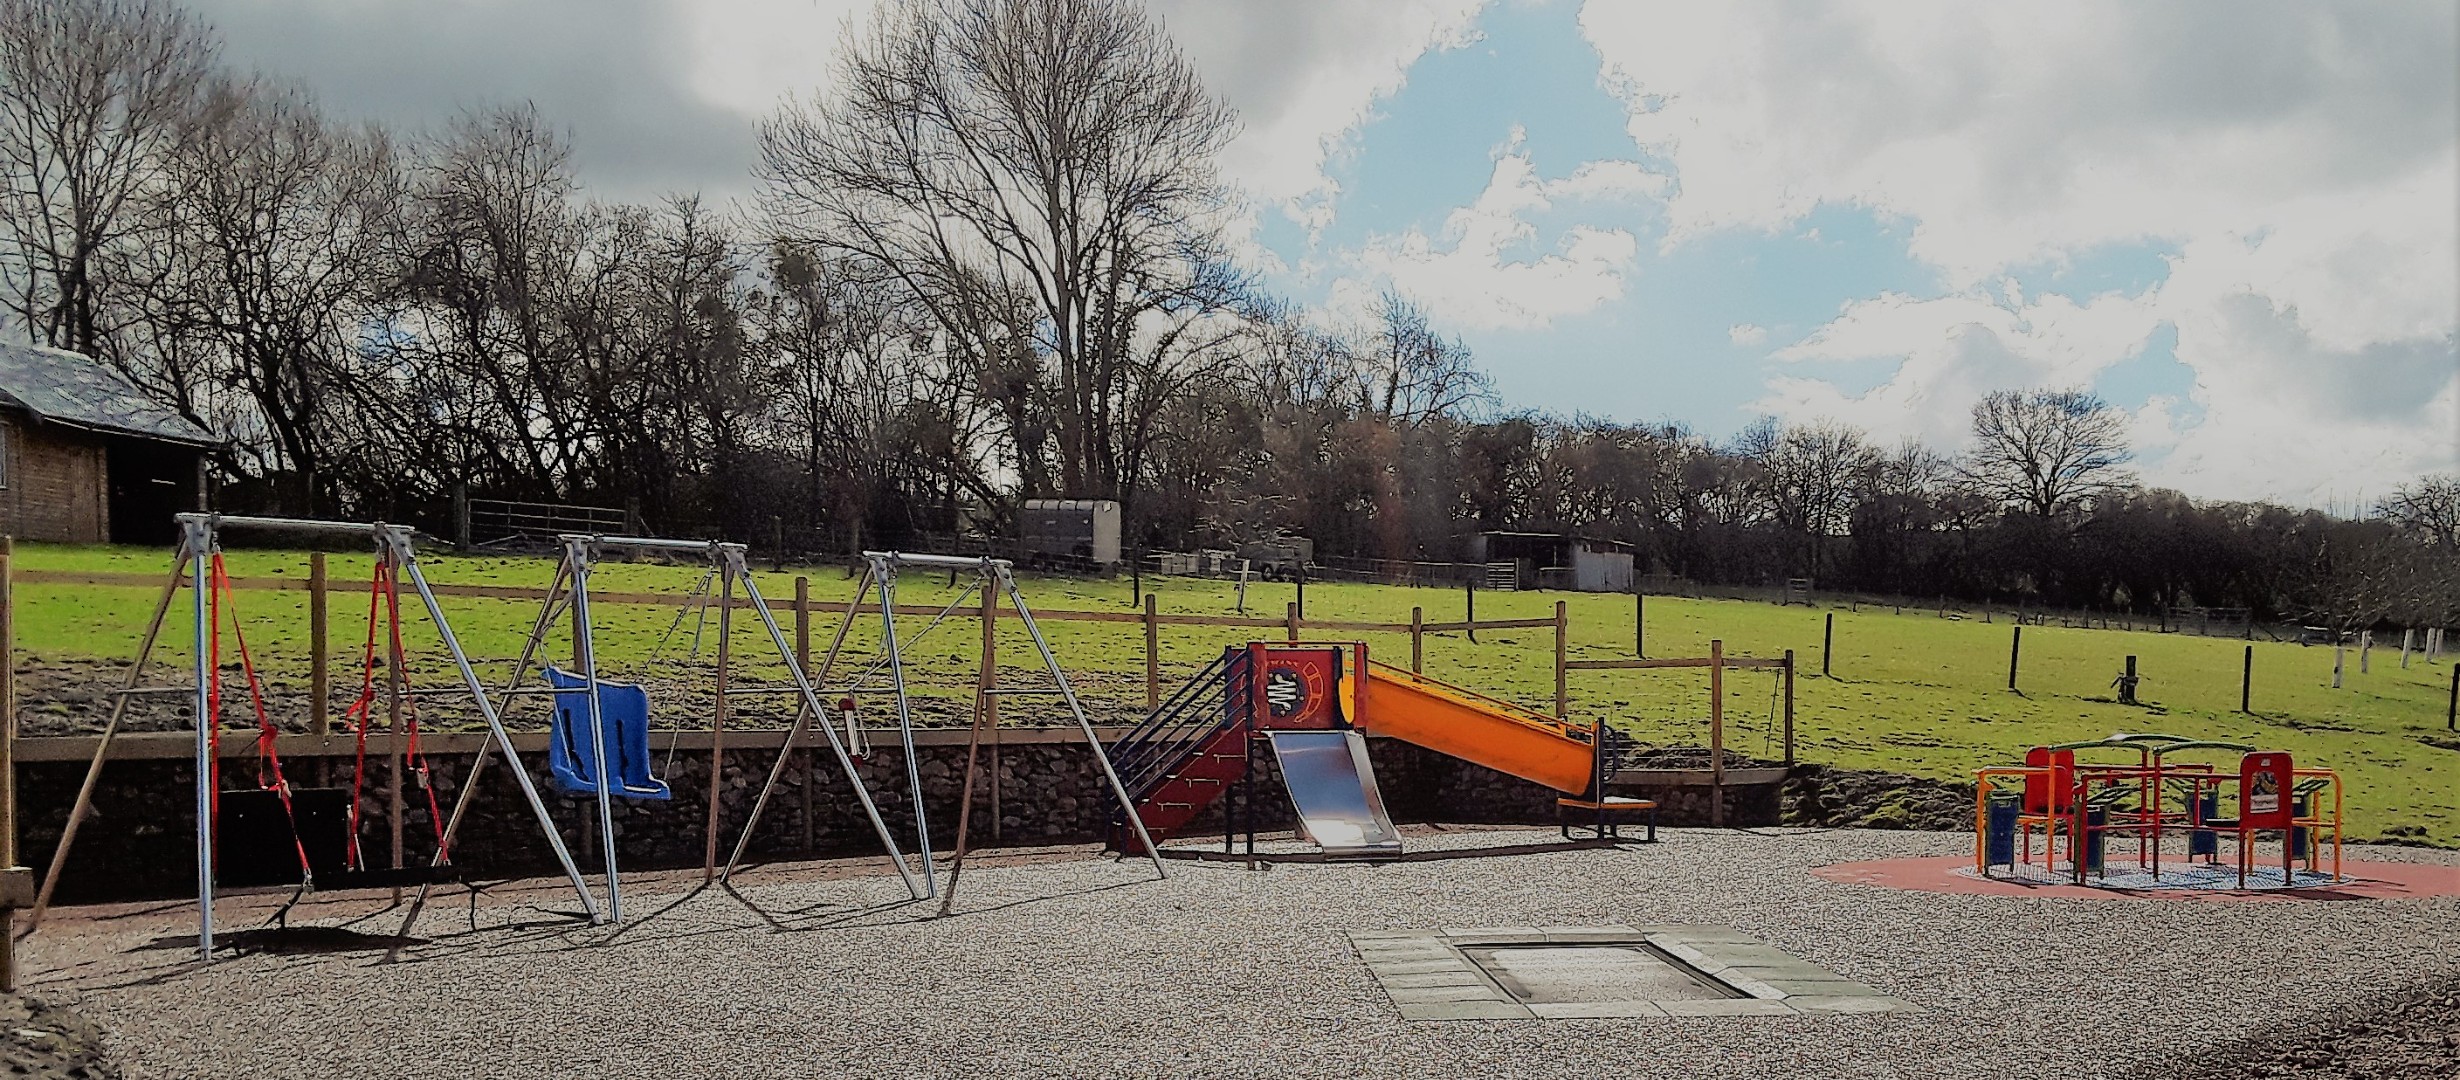 image shows an activity park with a wheelchair swing, a support seat swing and a standard swing, a small climbing unit with a slide, a floor trampoline and a roundabout. There is green grass and trees behind the park area